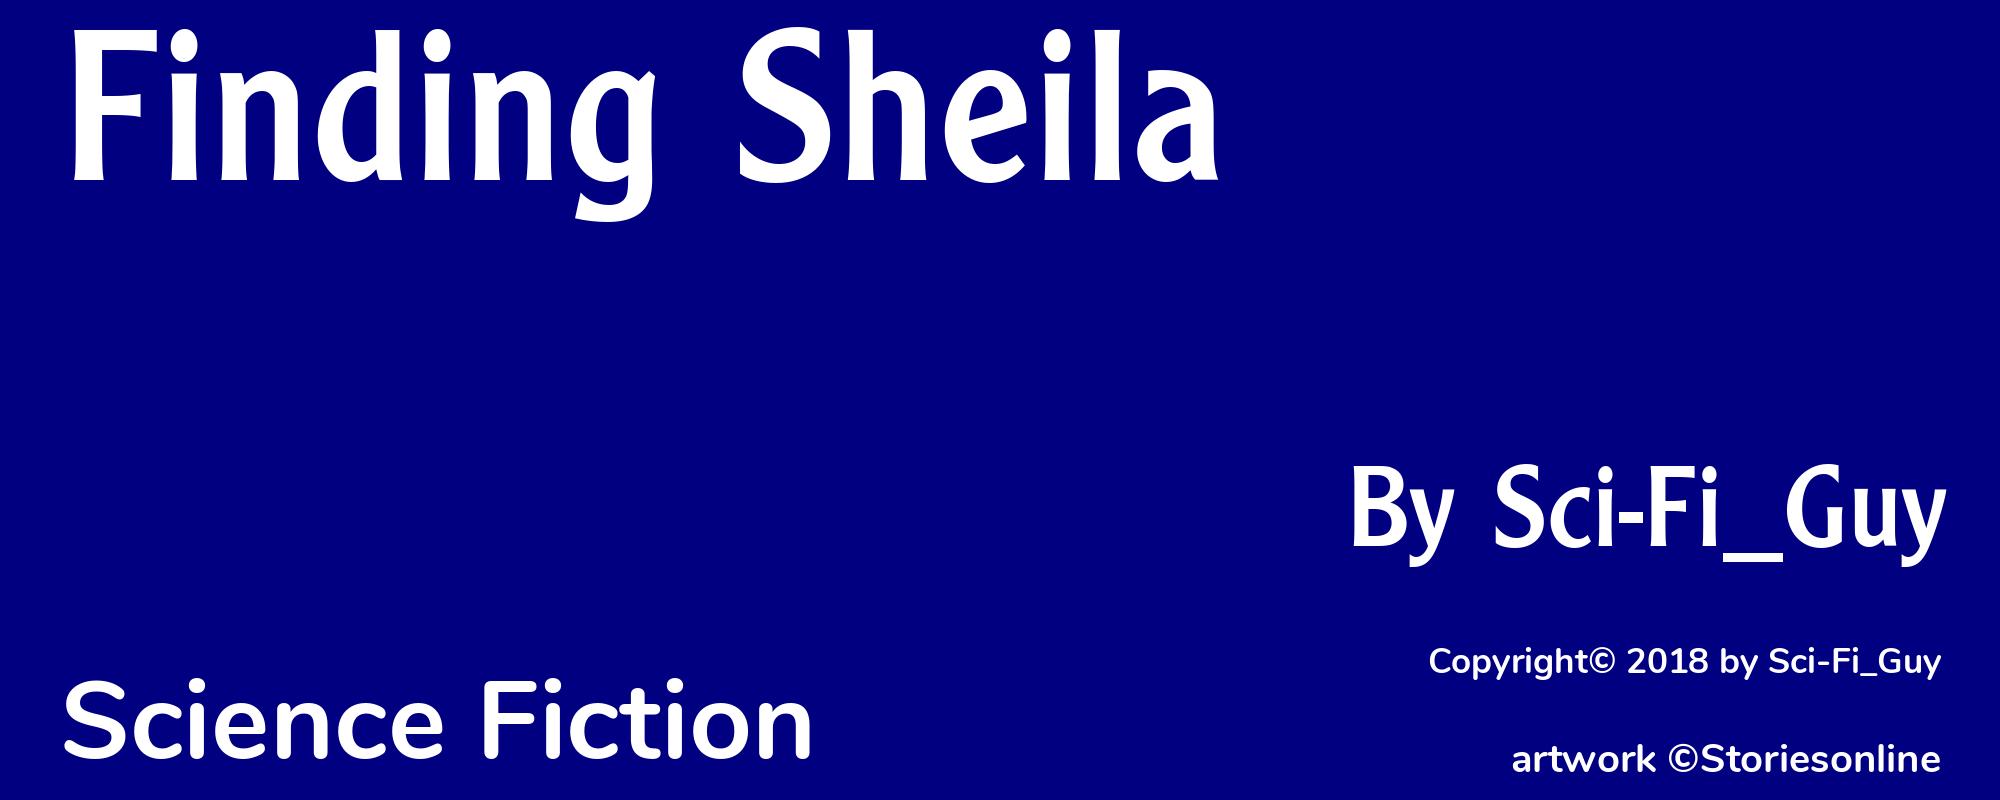 Finding Sheila - Cover